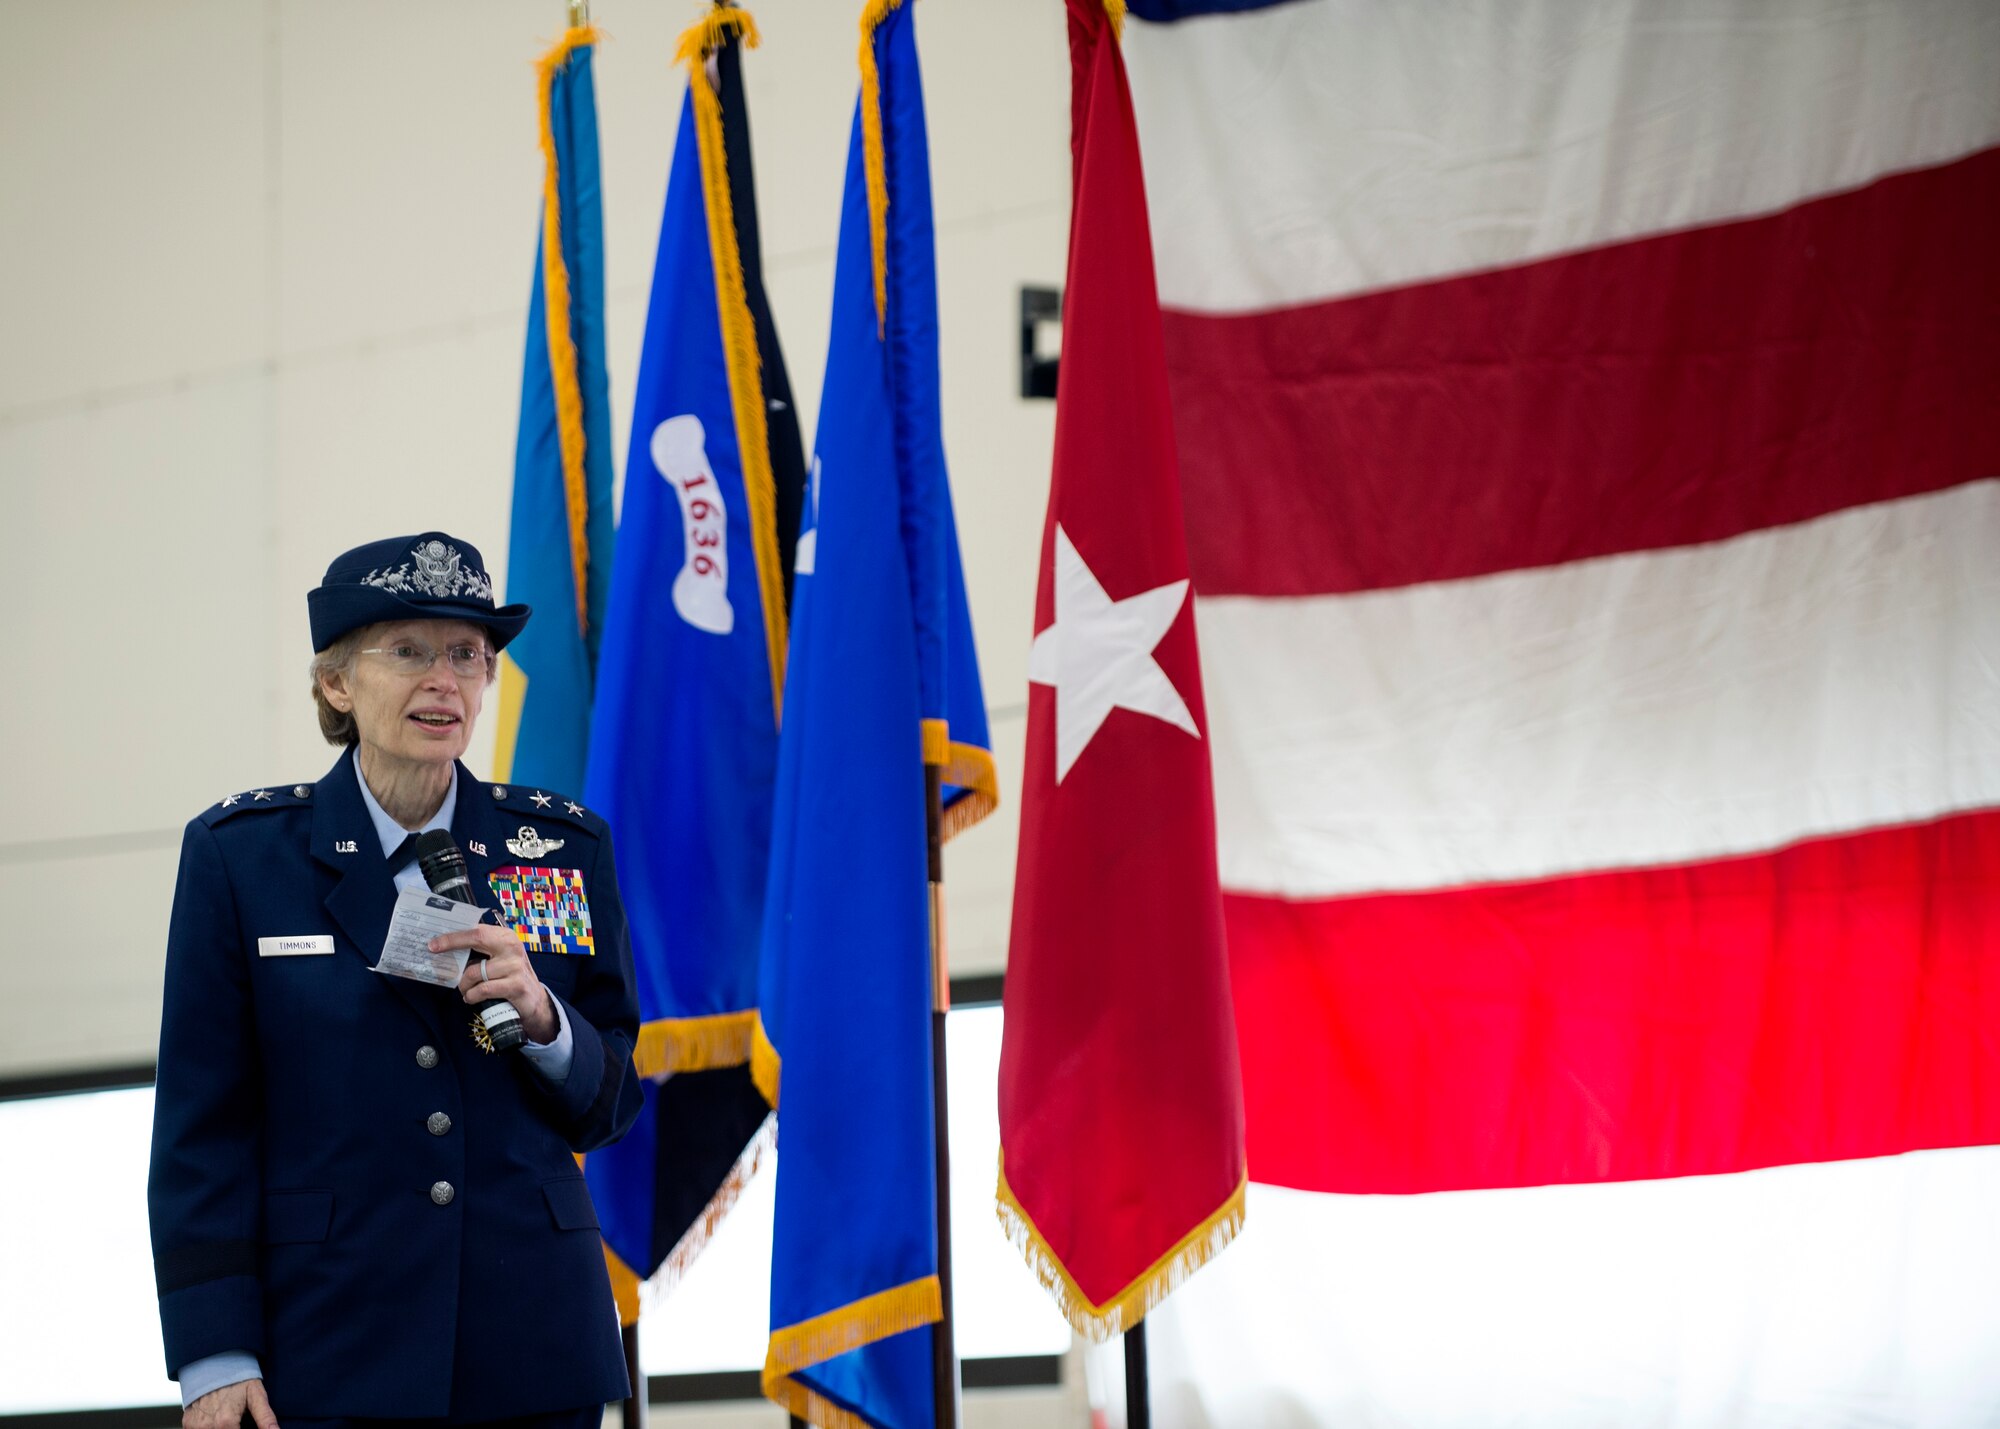 U.S. Air Force Maj. Gen. Carol Timmons addresses the crowd during a change of command ceremony at the Army Aviation Facility, New Castle, Del., March 2, 2019. Timmons served as the first female TAG of the DNG and first female Major General in the DNG. (U.S. Air National Guard photo by Senior Airman Katherine Miller)